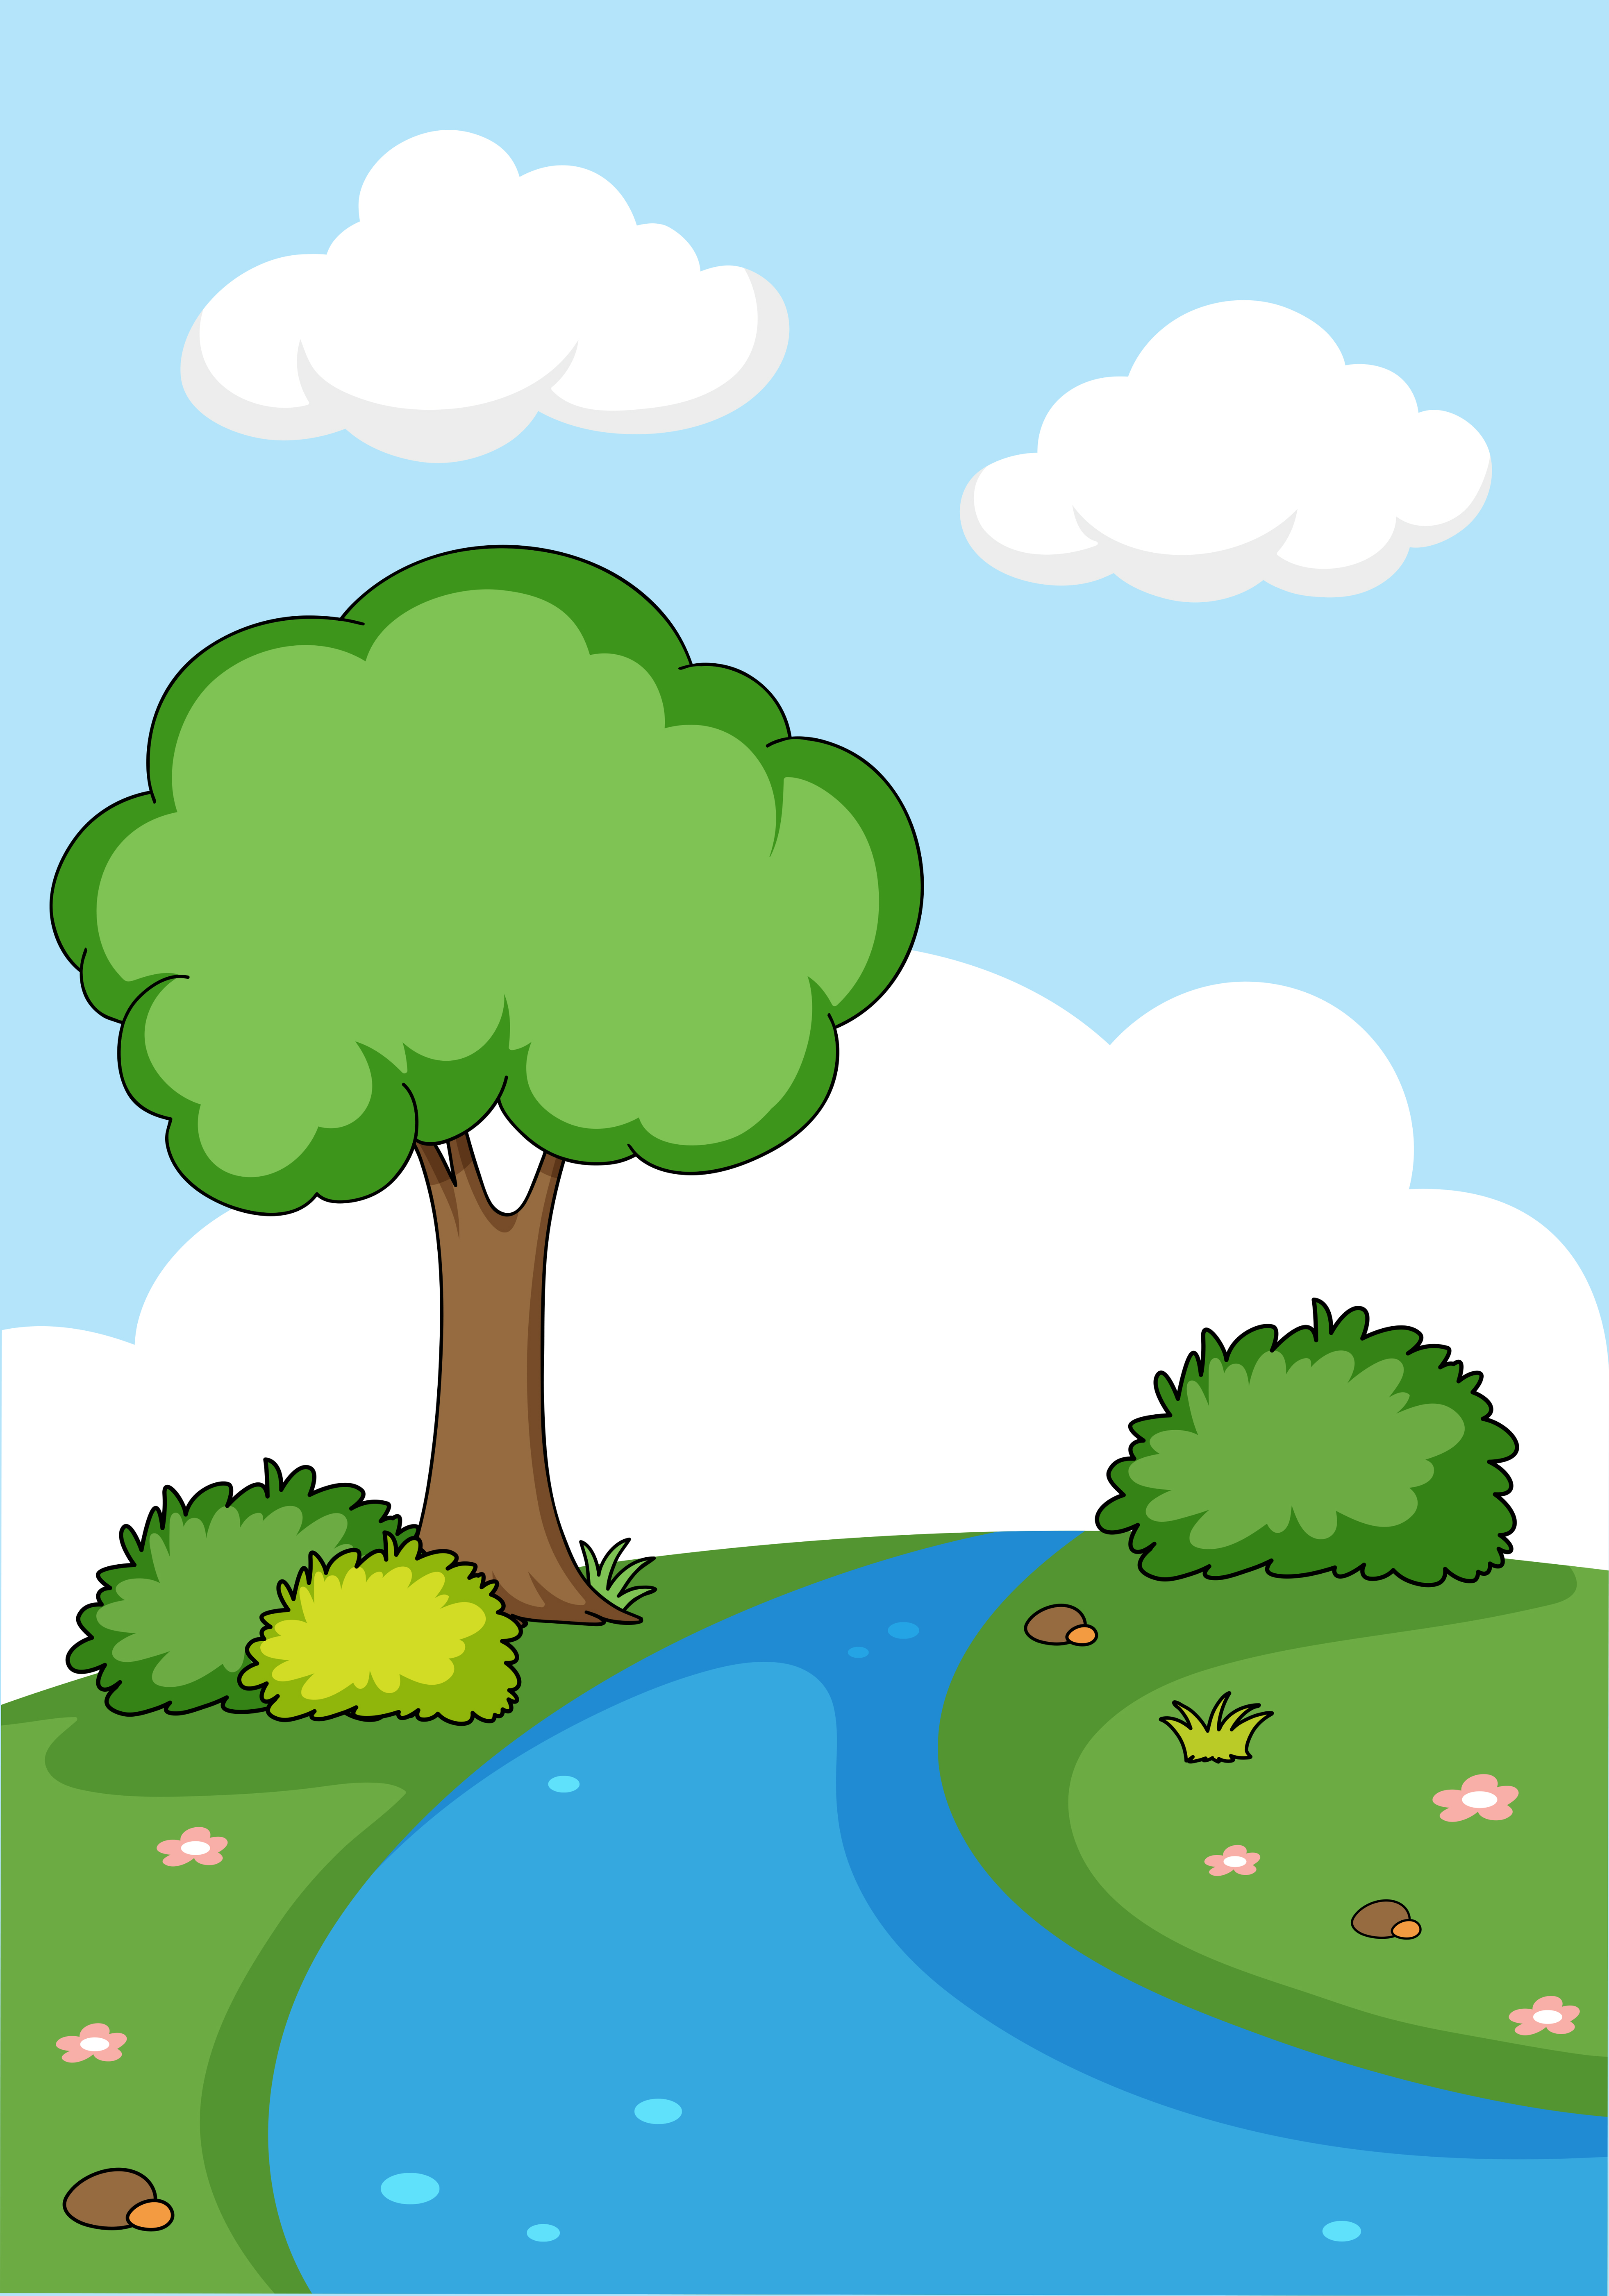 Download A simple nature background - Download Free Vectors ...